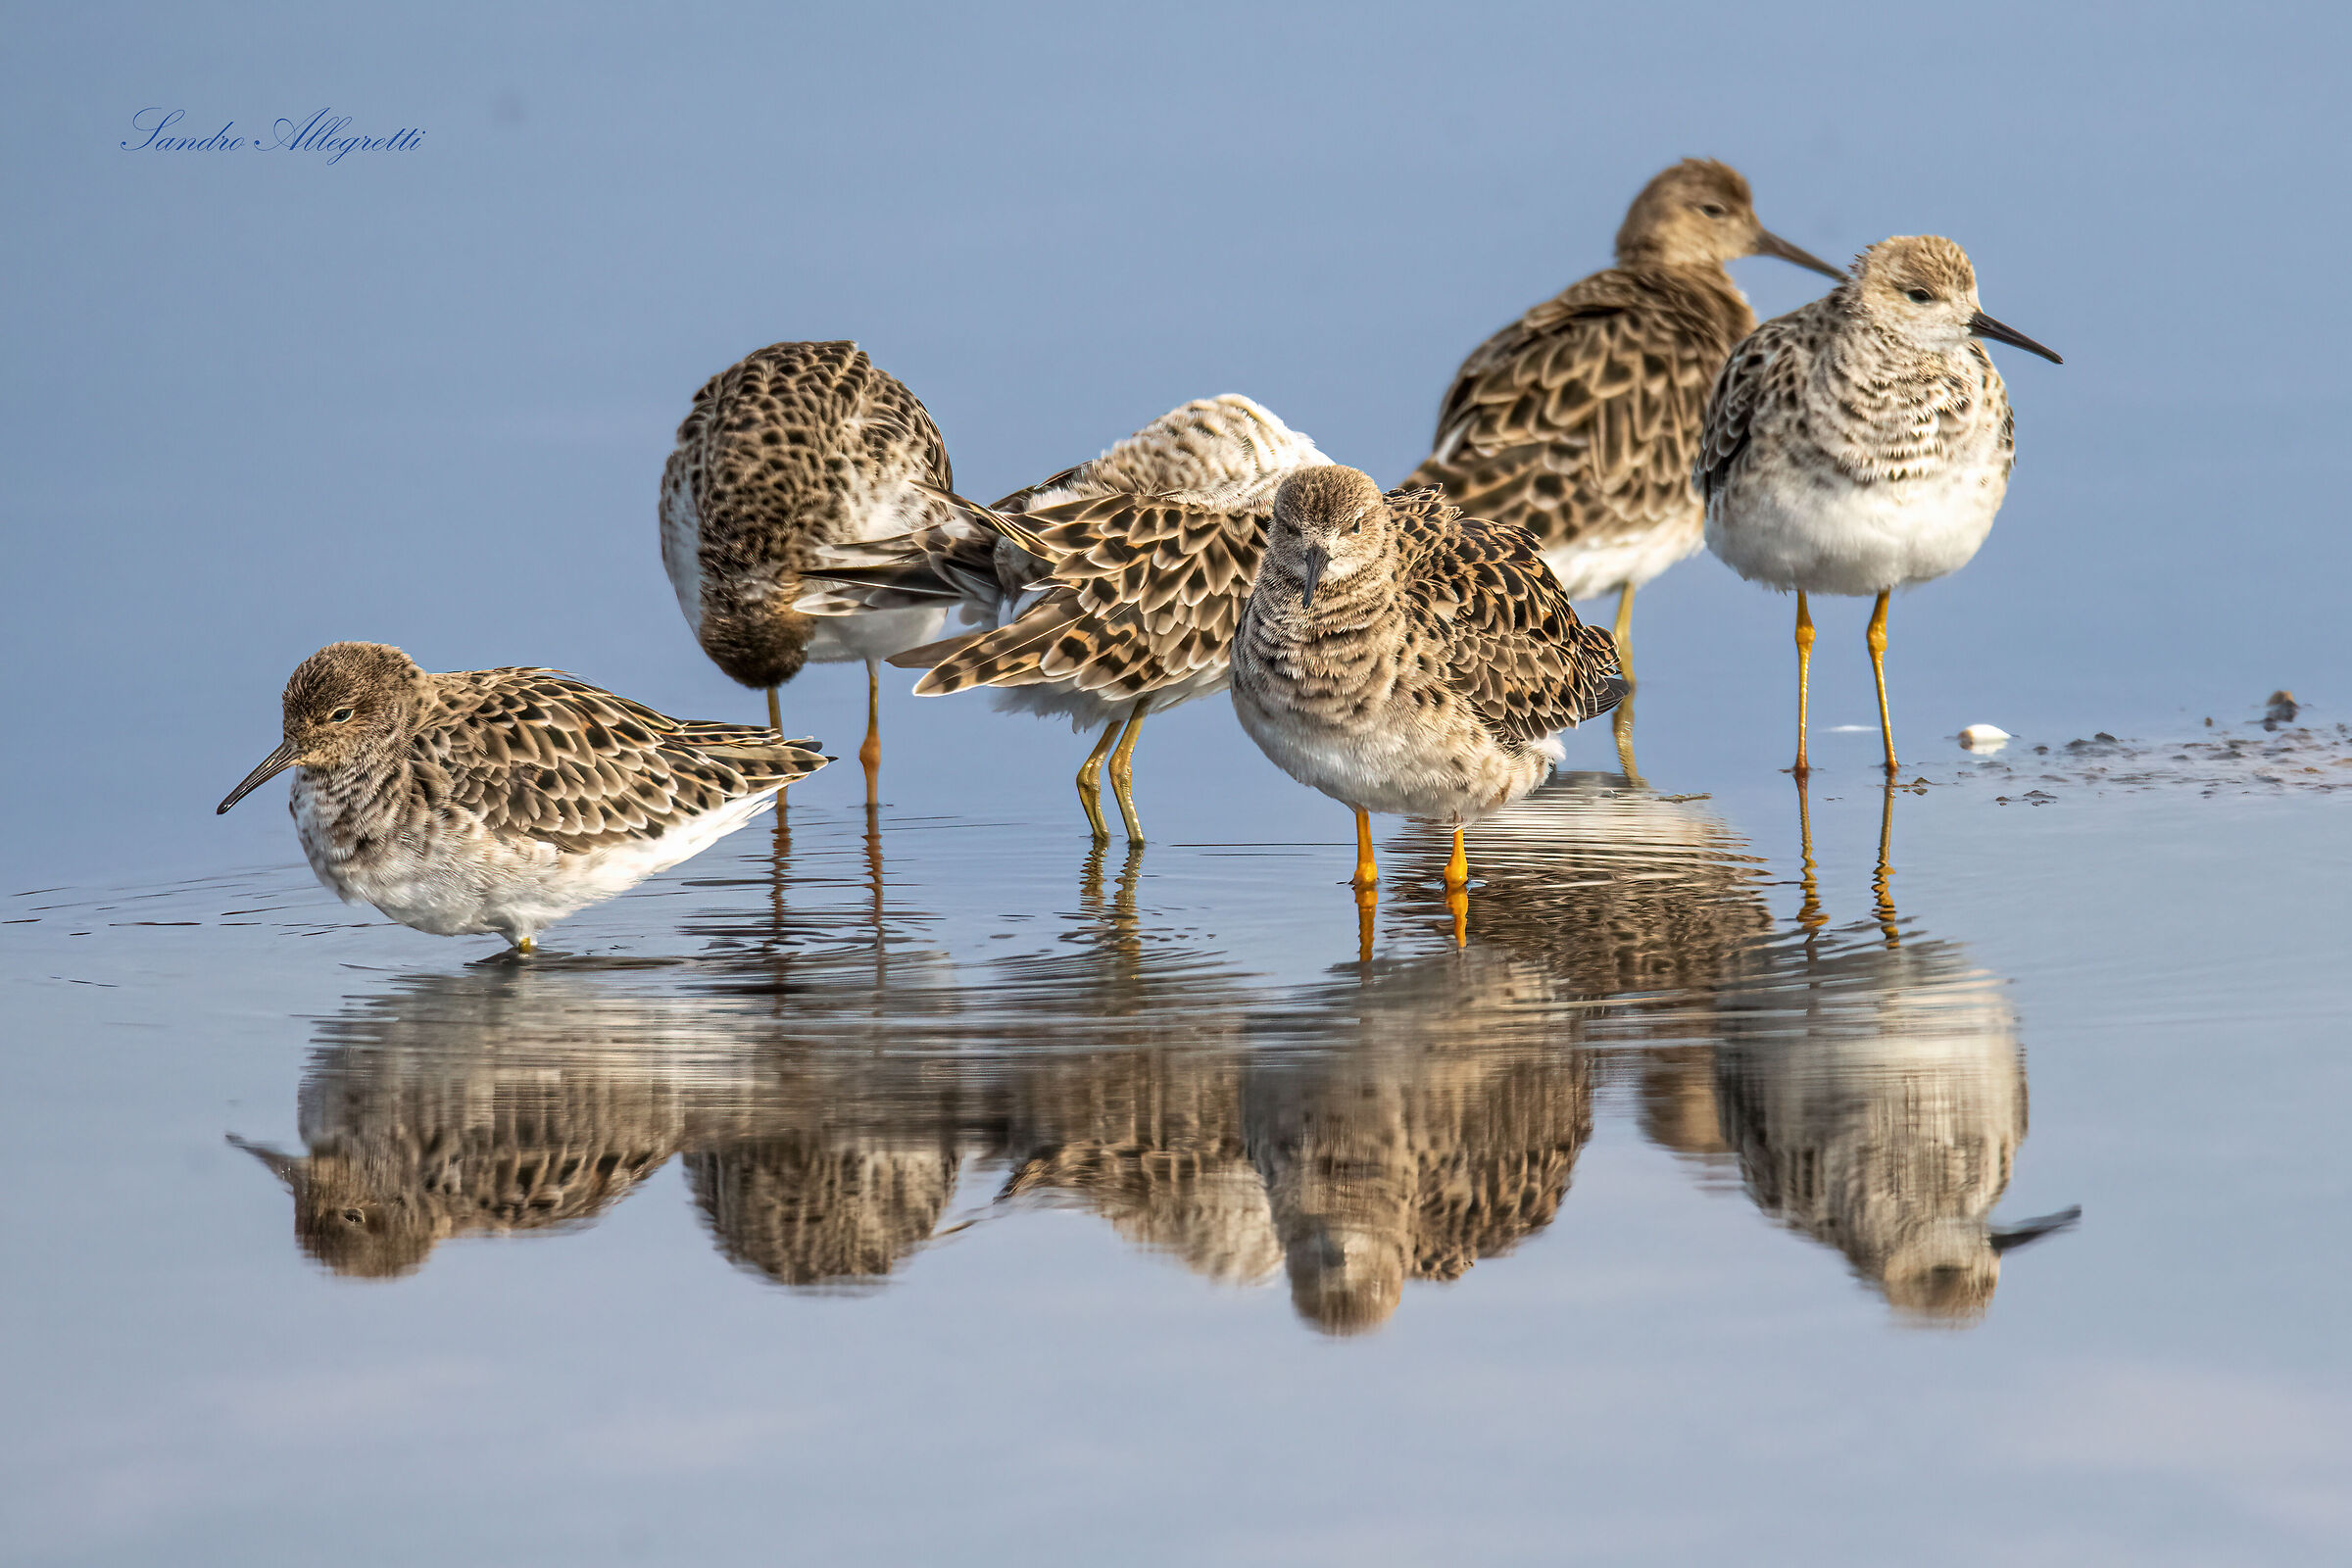 Small group of "fighters" (Calidris pugnax)...